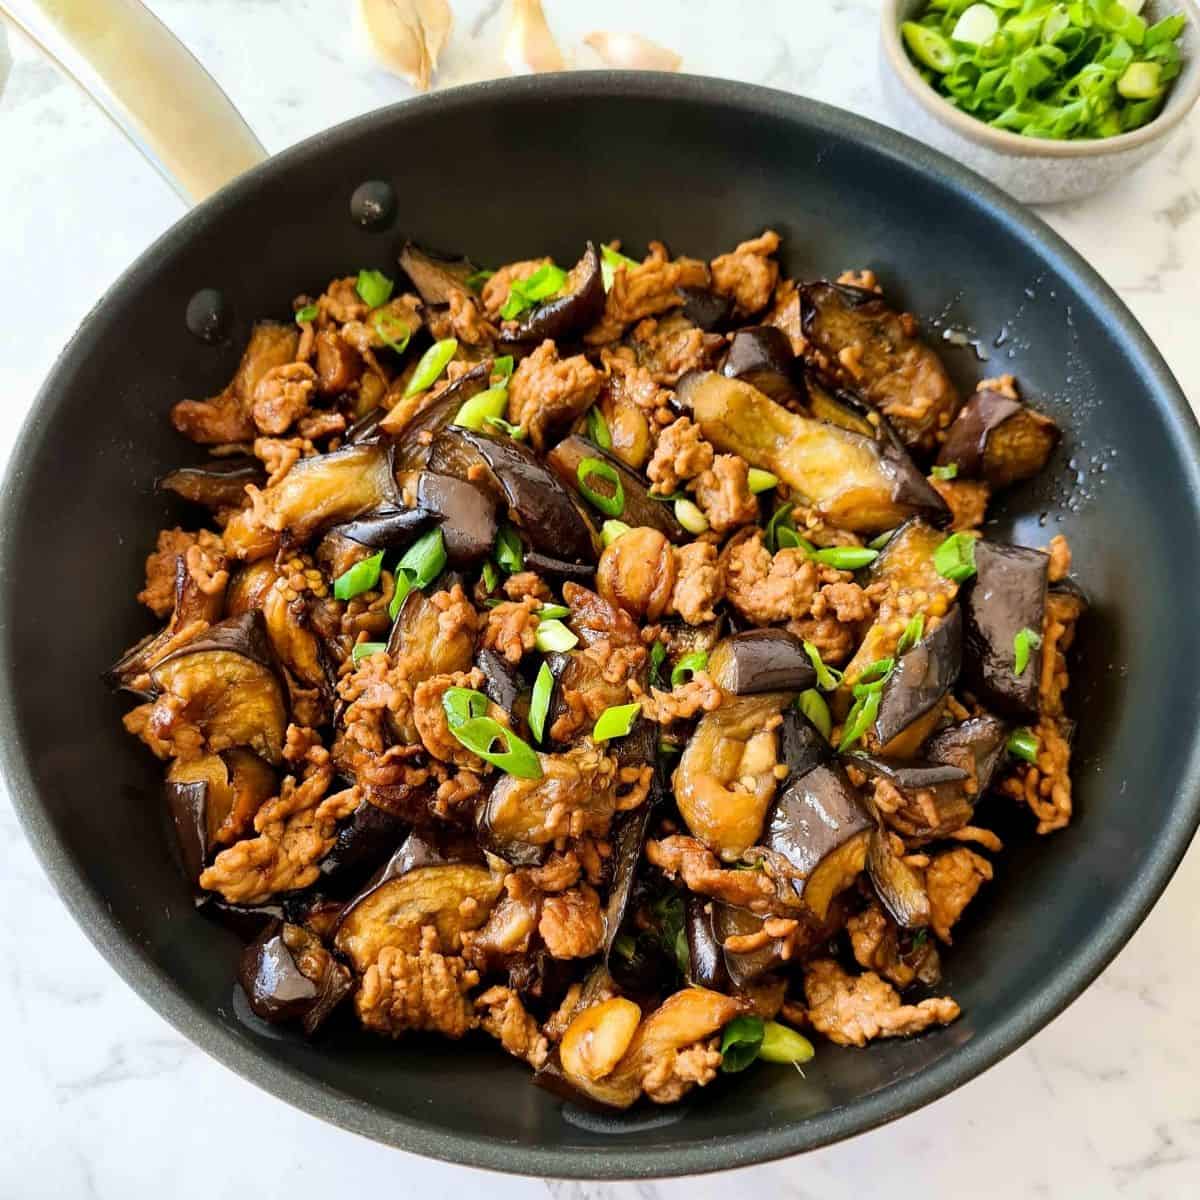 Freshly cooked Chinese eggplant with minced pork in a pan